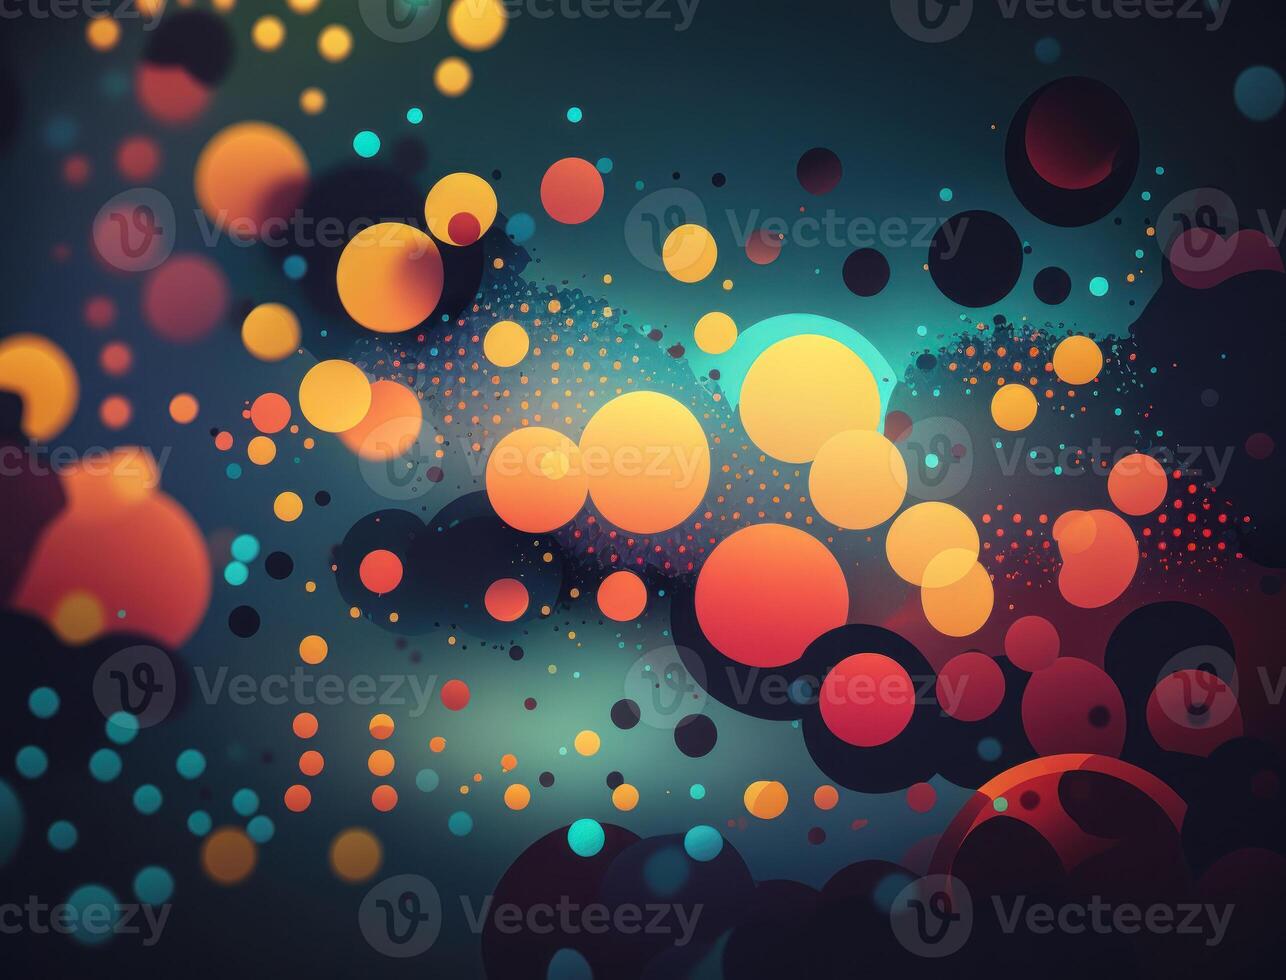 Colorful abstract geometric background with dot shapes pointillism style created with technology photo